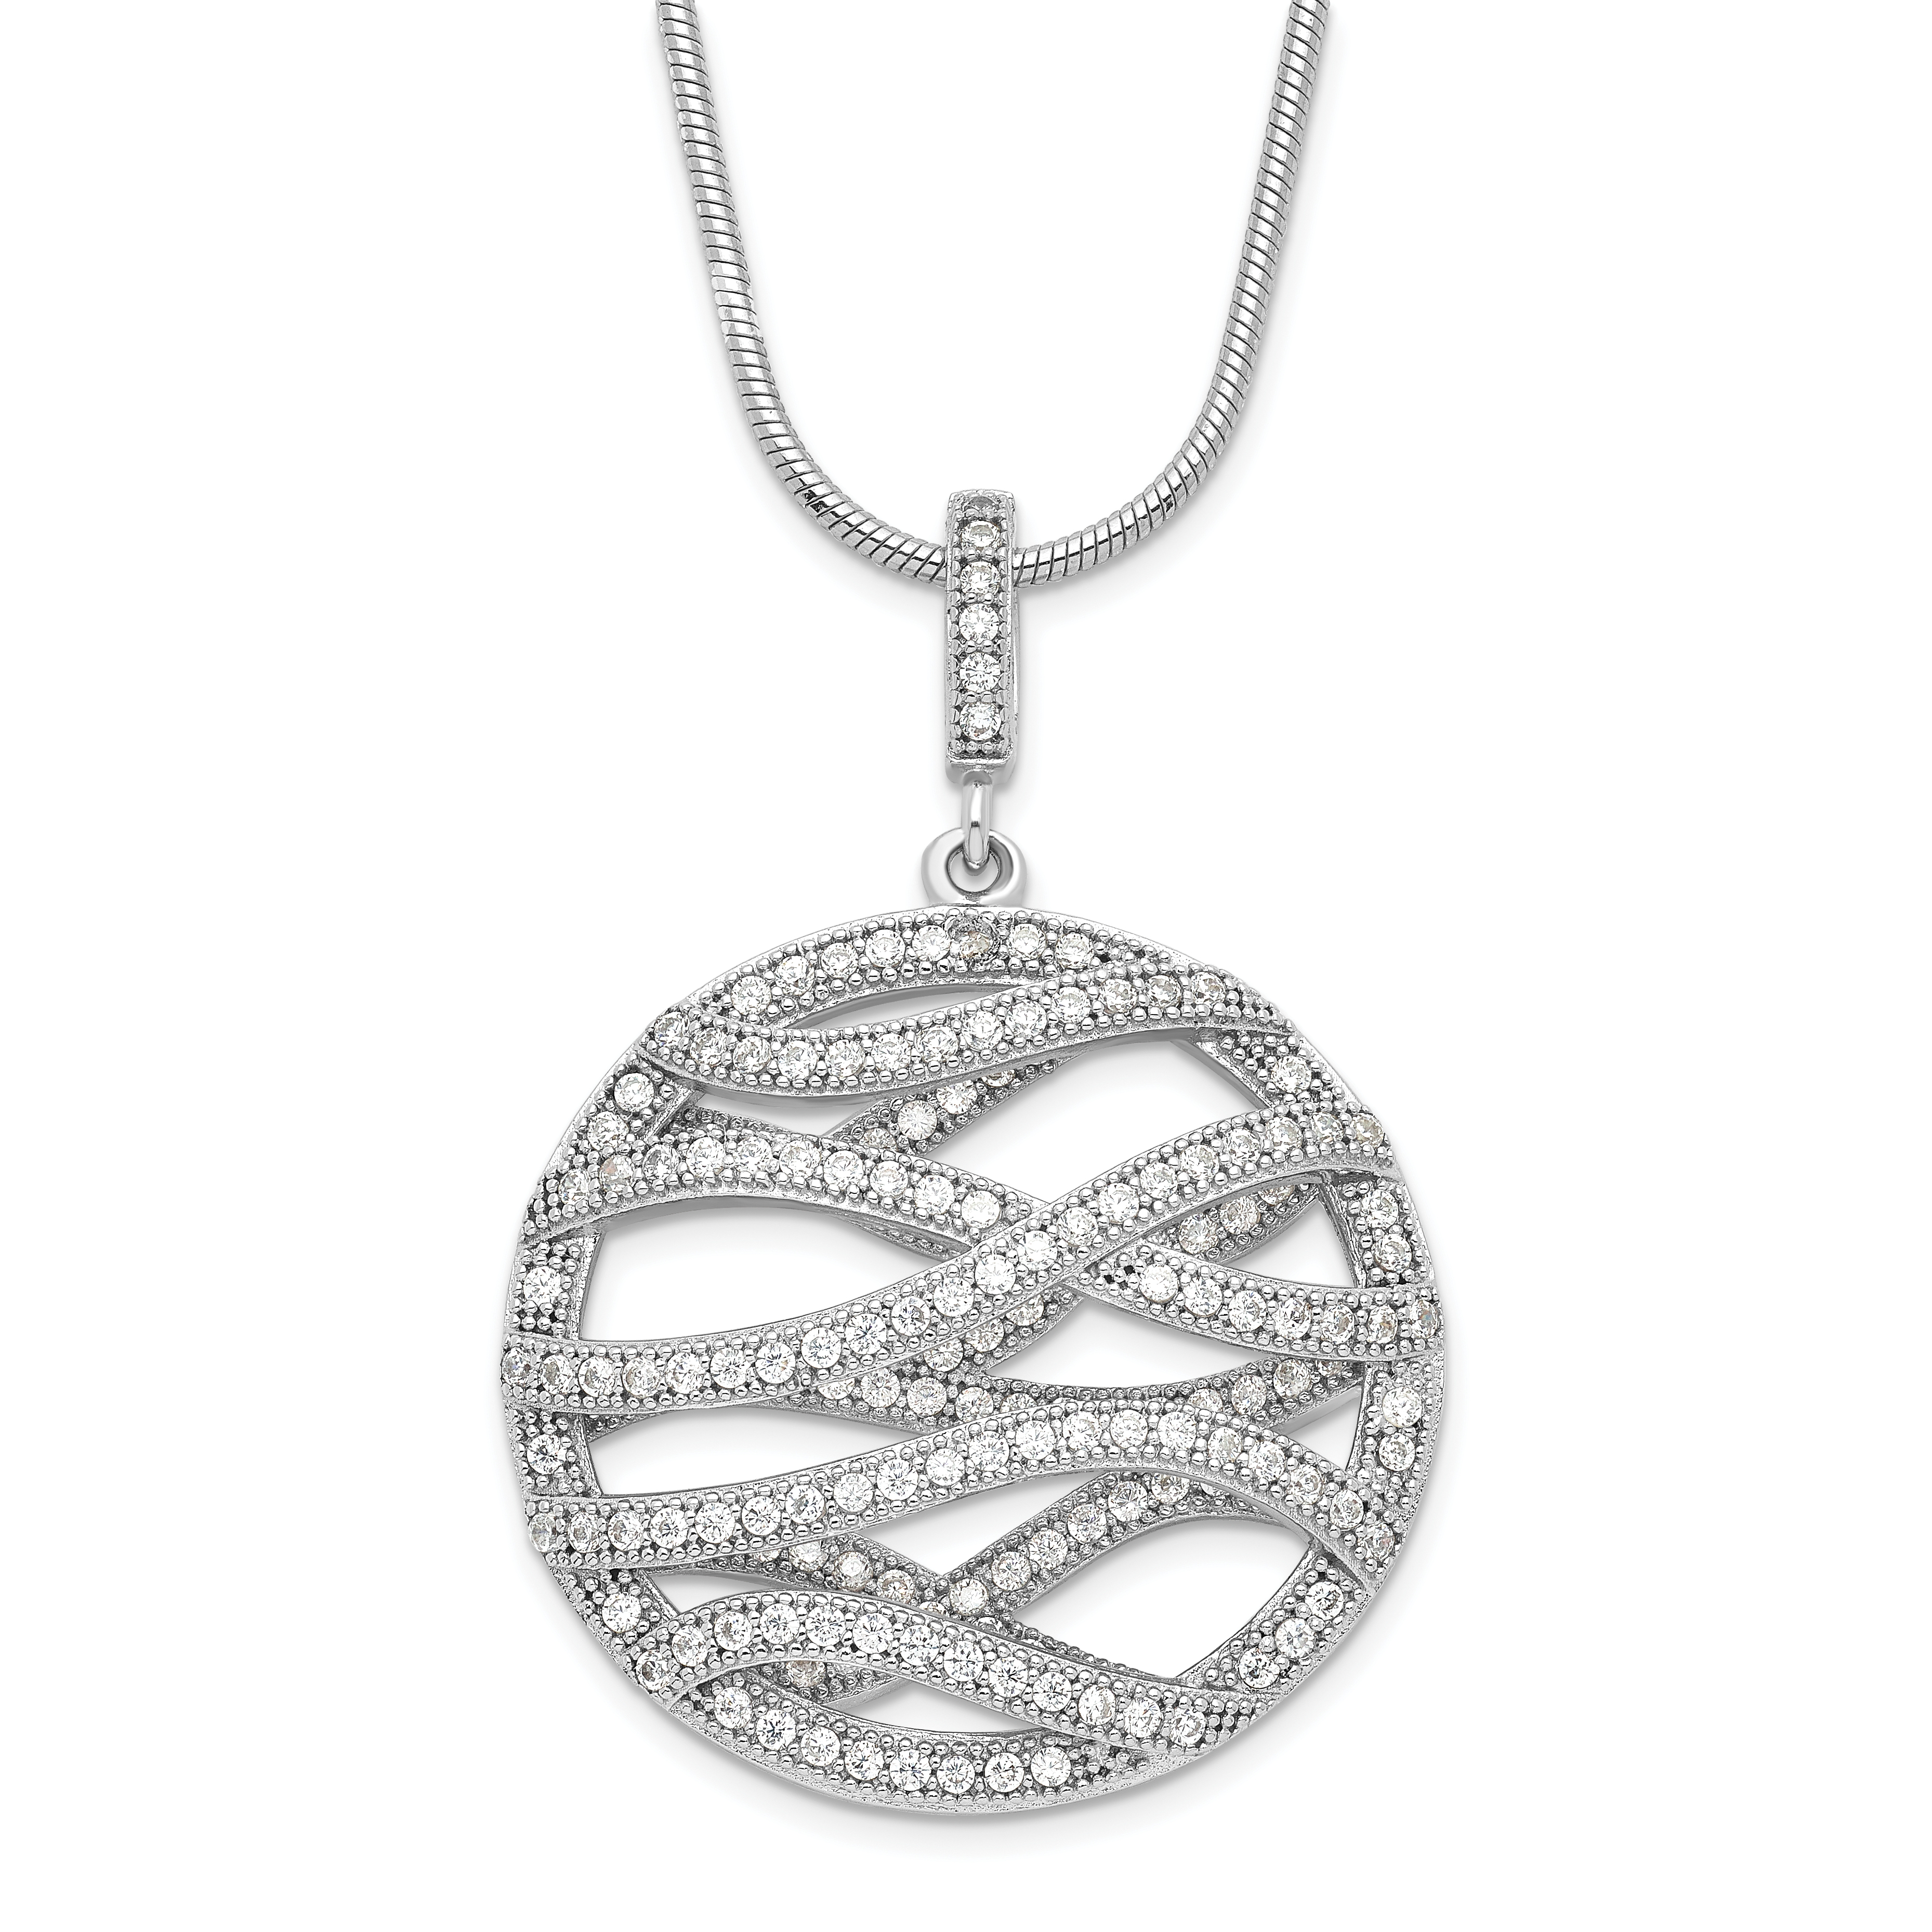 Jewelry Necklaces Necklace with Pendants Sterling Silver and CZ Brilliant Embers Polished Necklace 